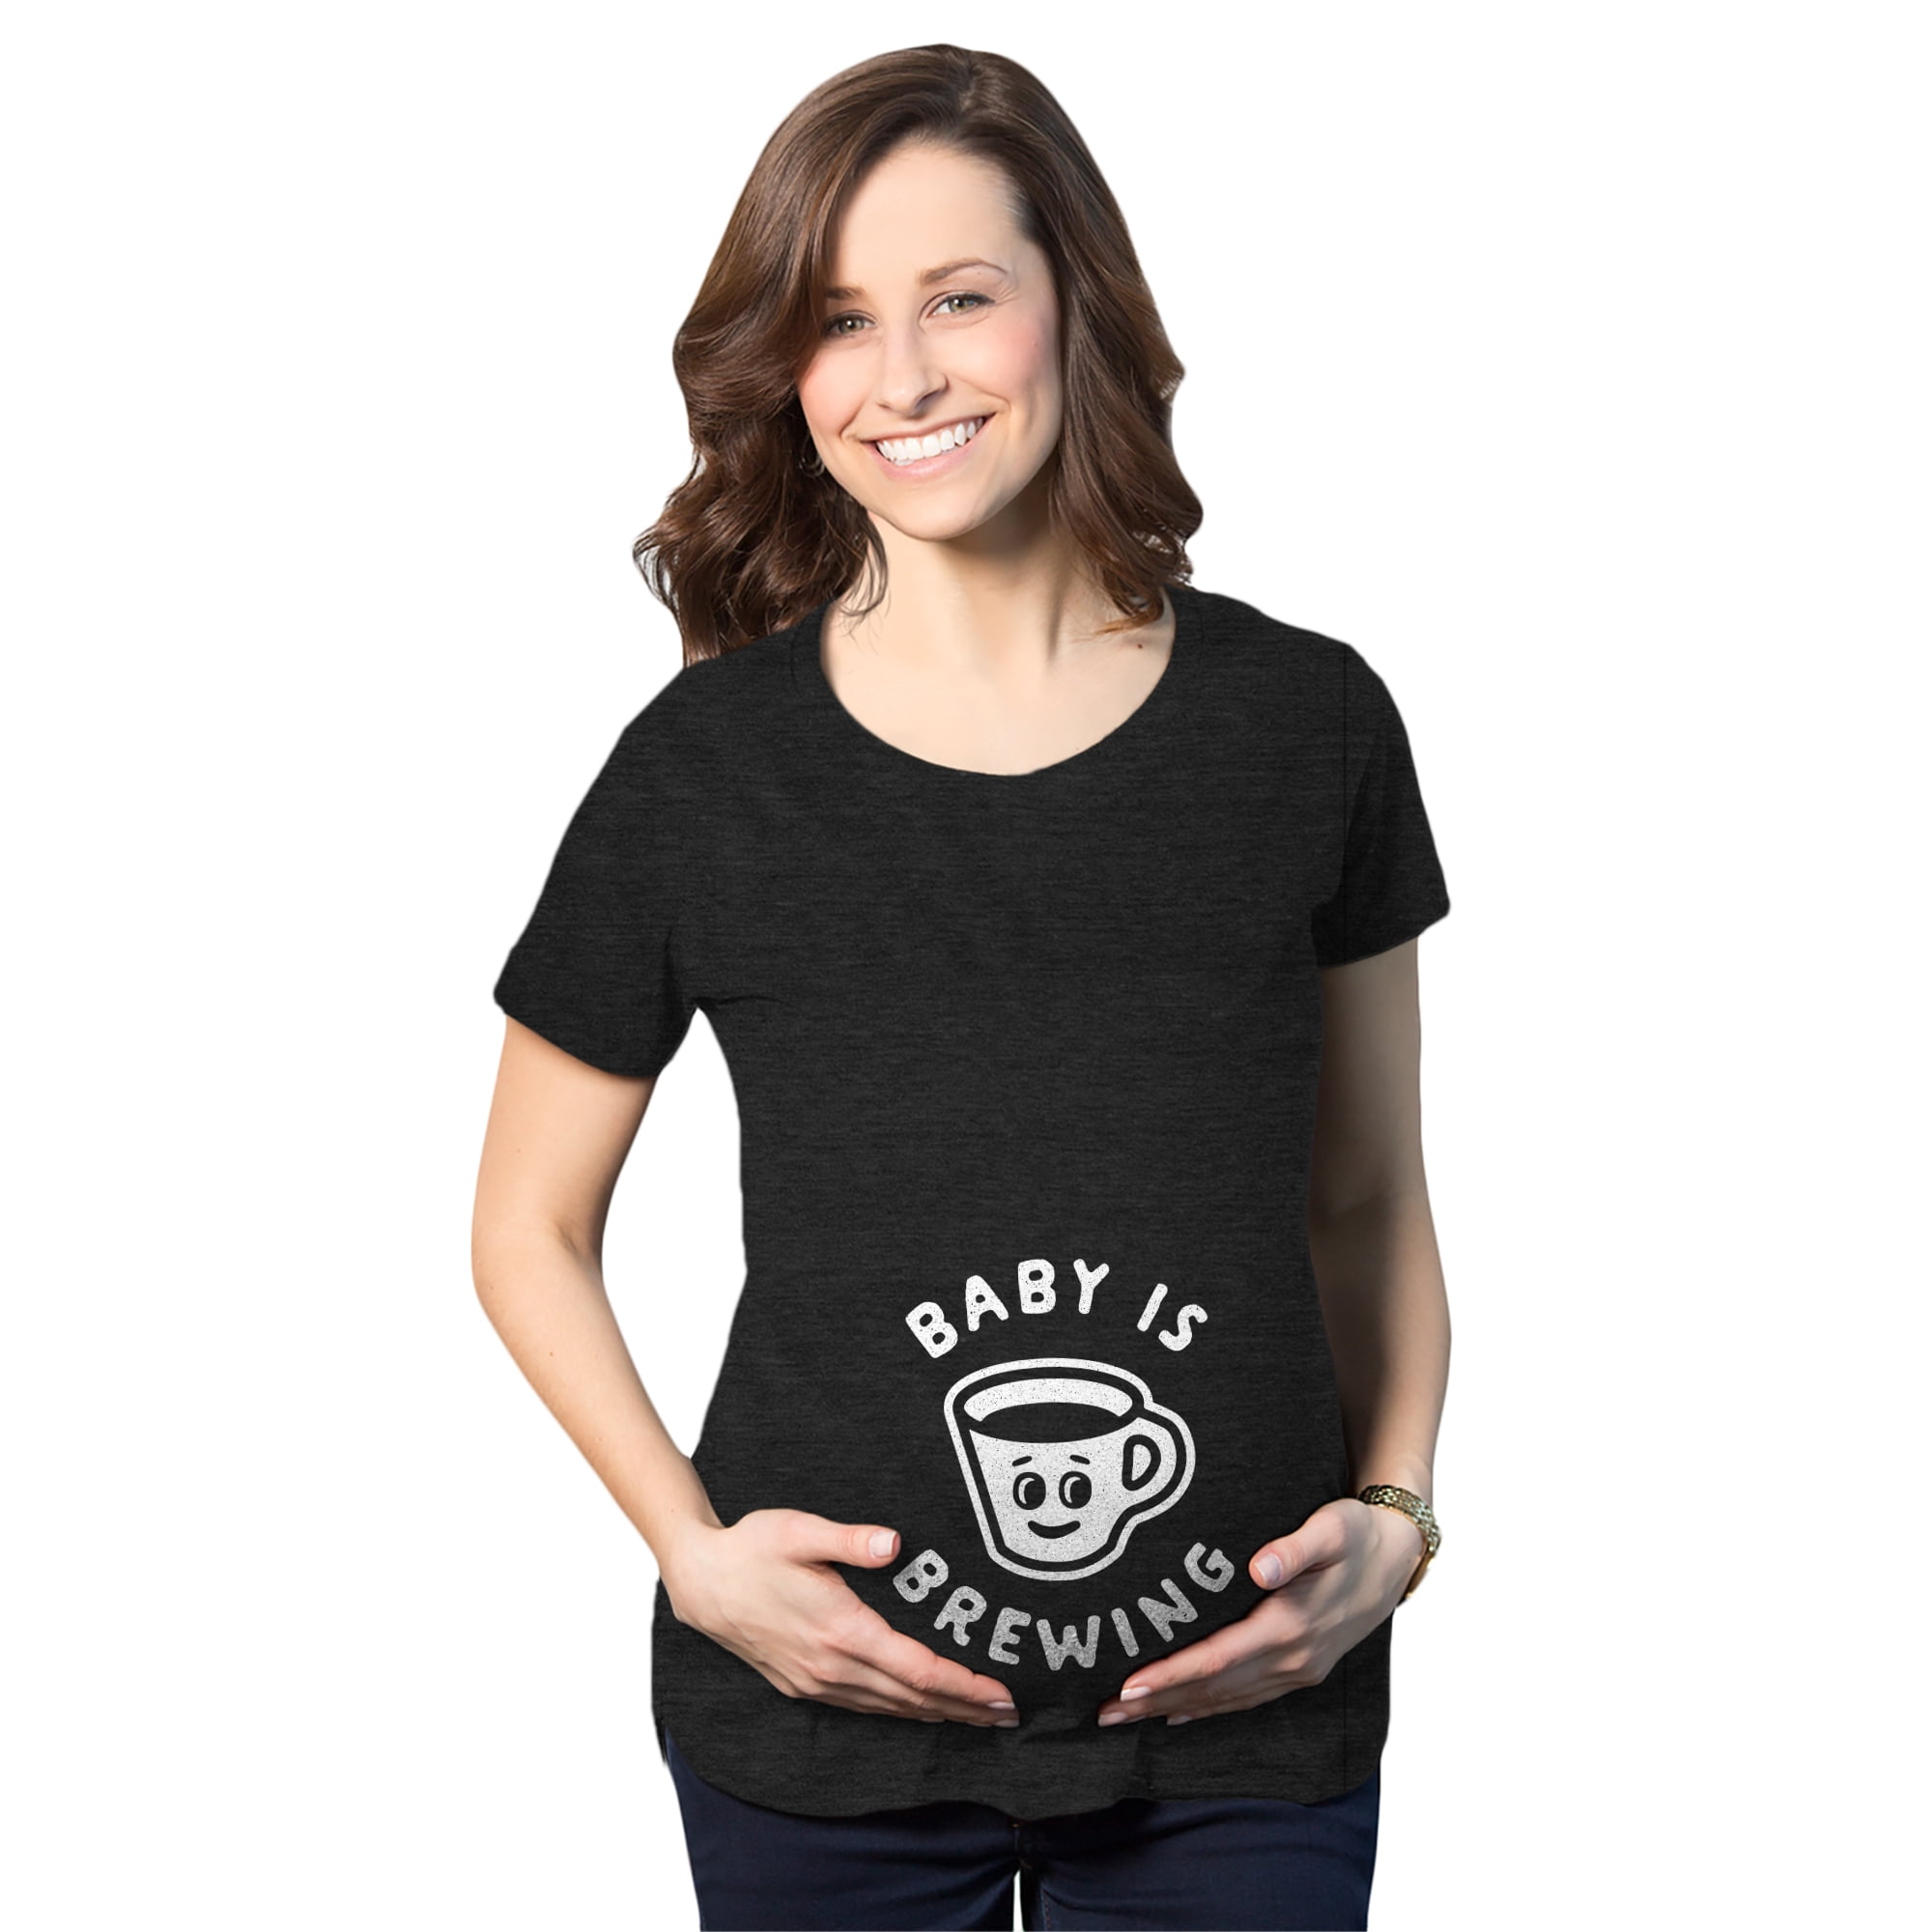 Baby Is Brewing Funny Pregnancy Announcement Shirts Personalized Coffee  Lover Expecting Mothers Maternity Shirt for Women Gender Reveal Shower Gifts